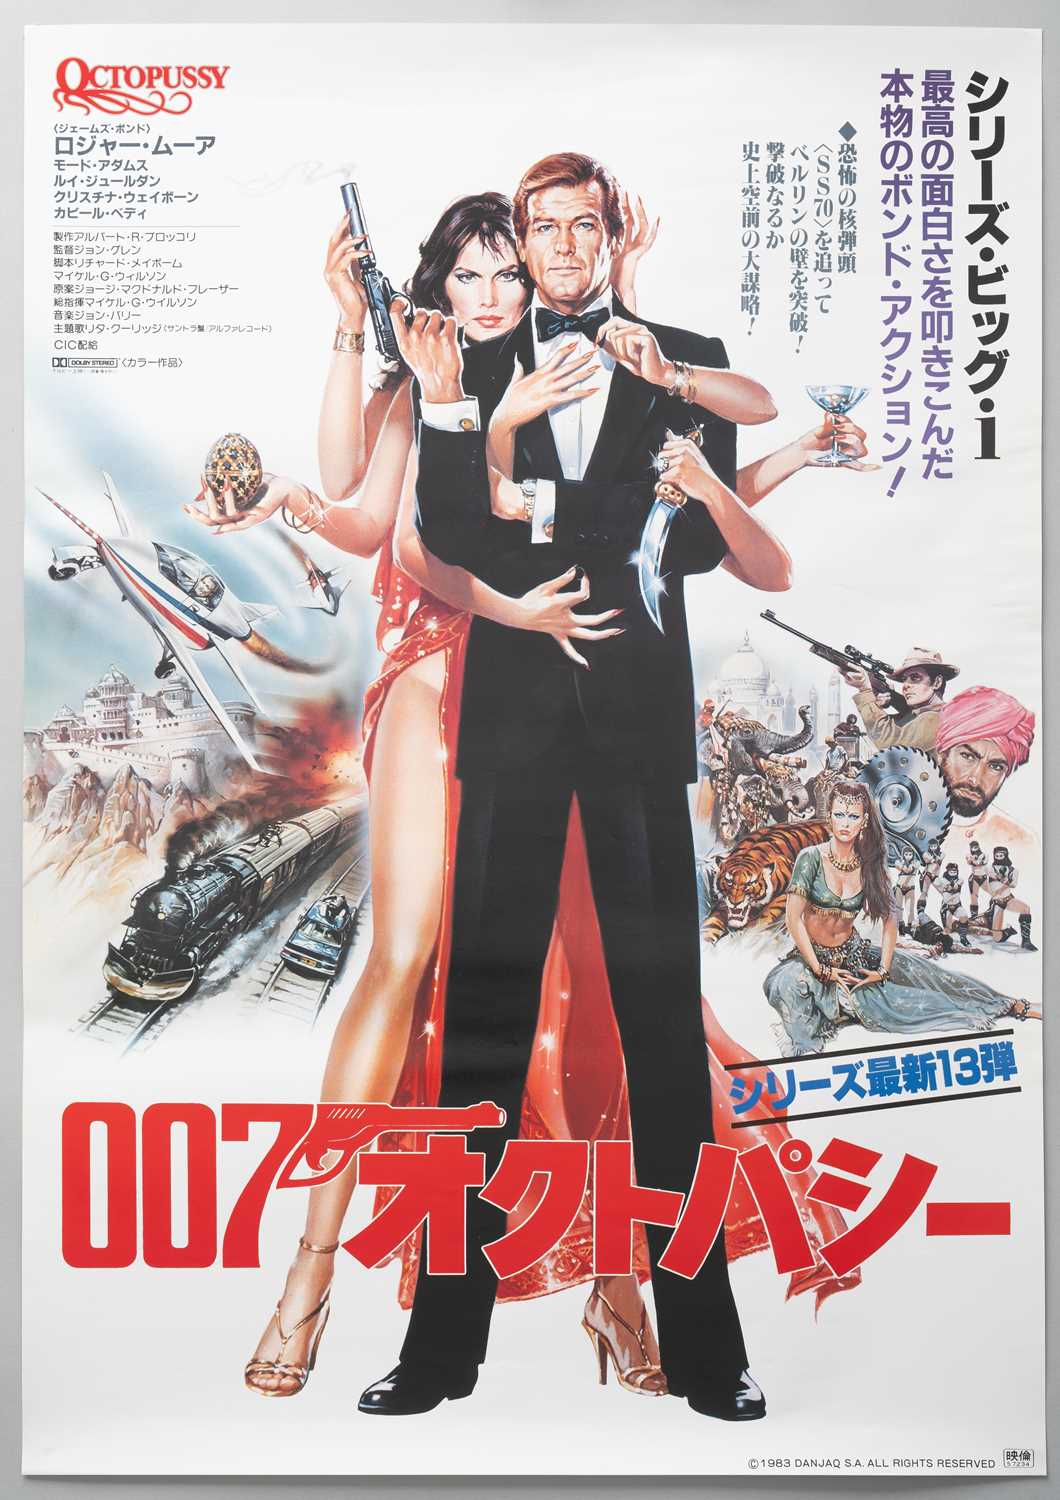 NO RESERVE A JAPANESE JAMES BOND 007 POSTER SHOWA ERA, 1983 Featuring Roger Moore in Octopussy (